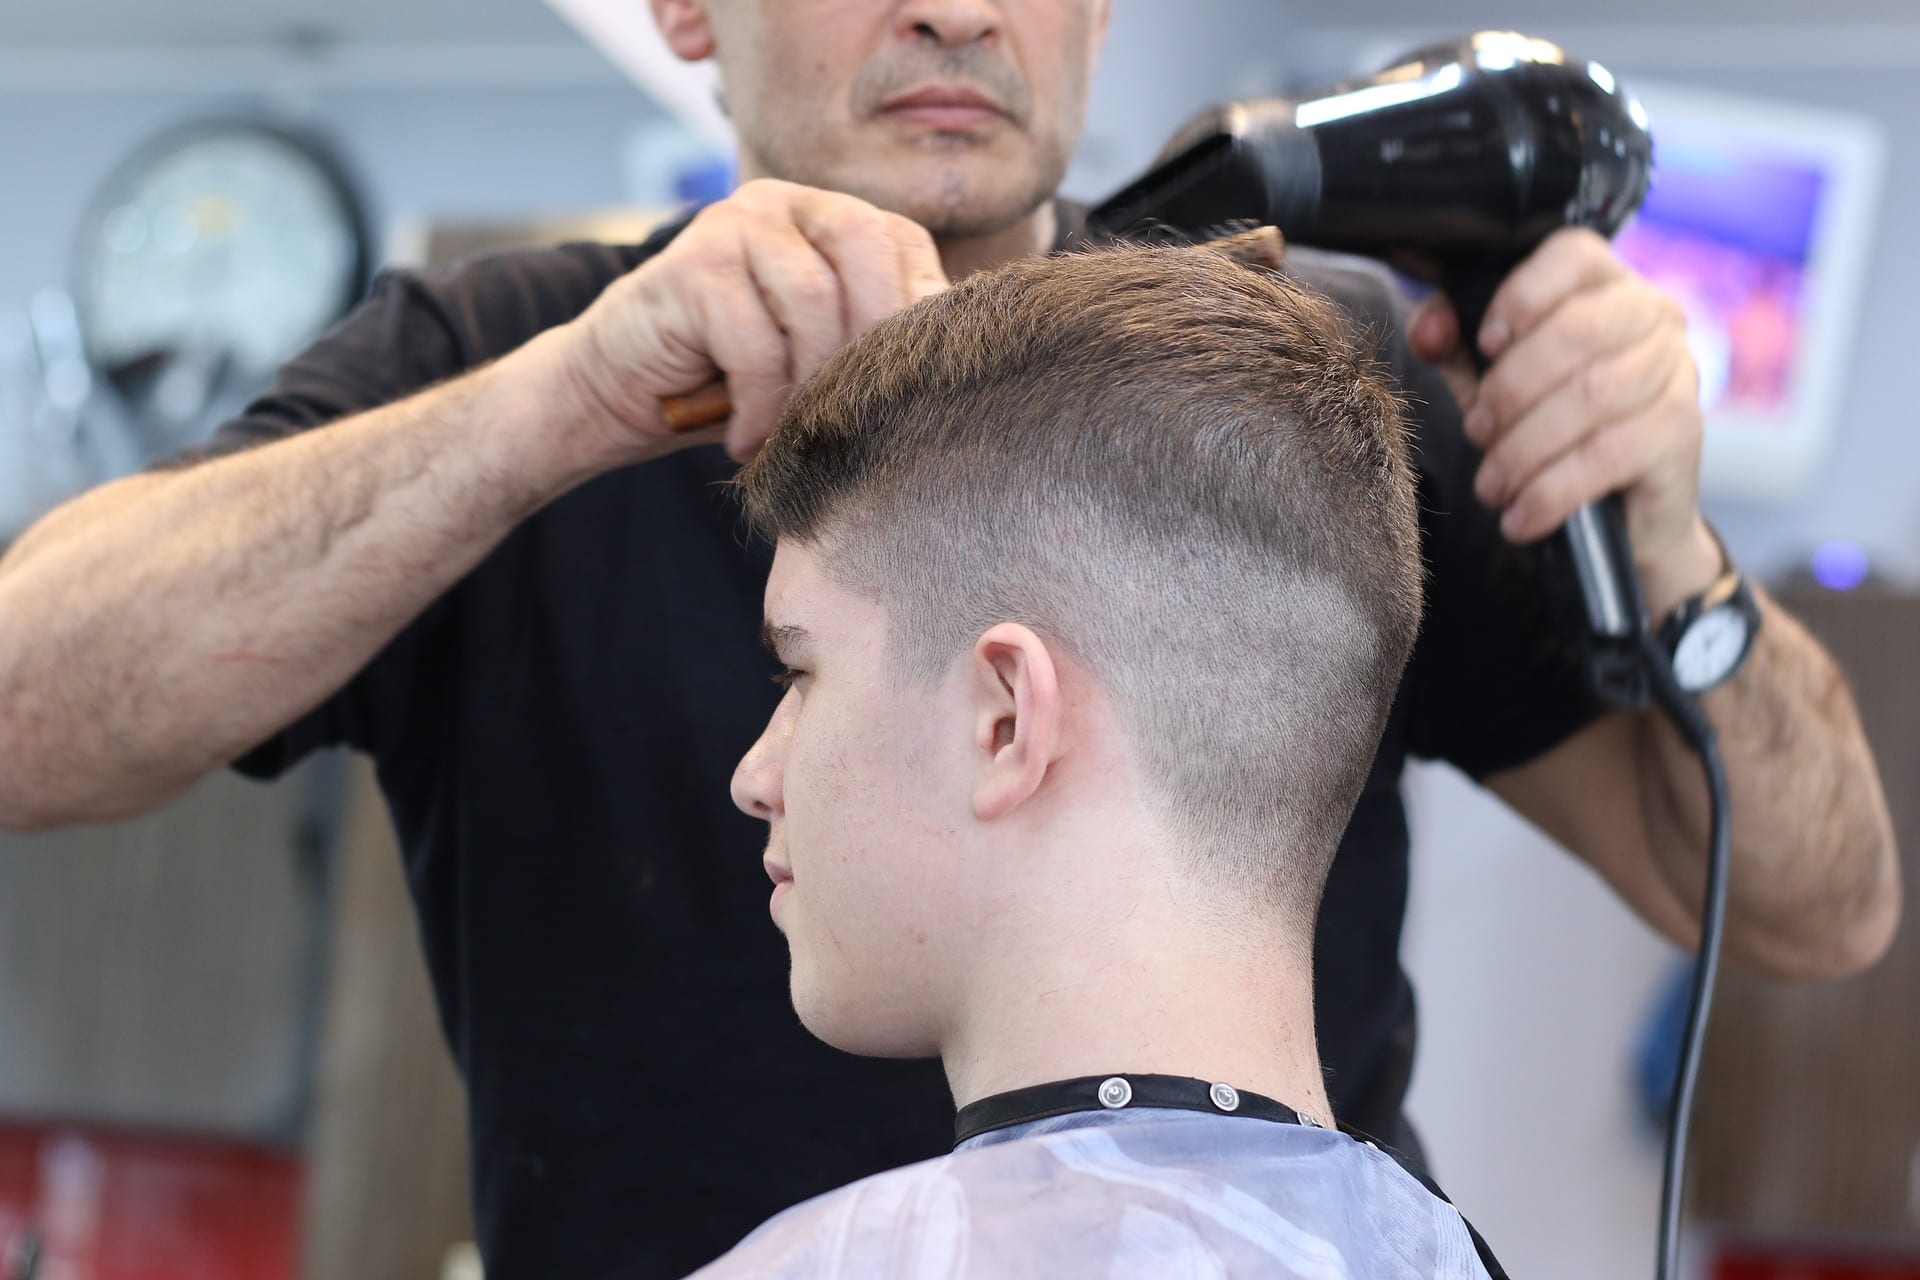 Advantages and disadvantages of being a Barber